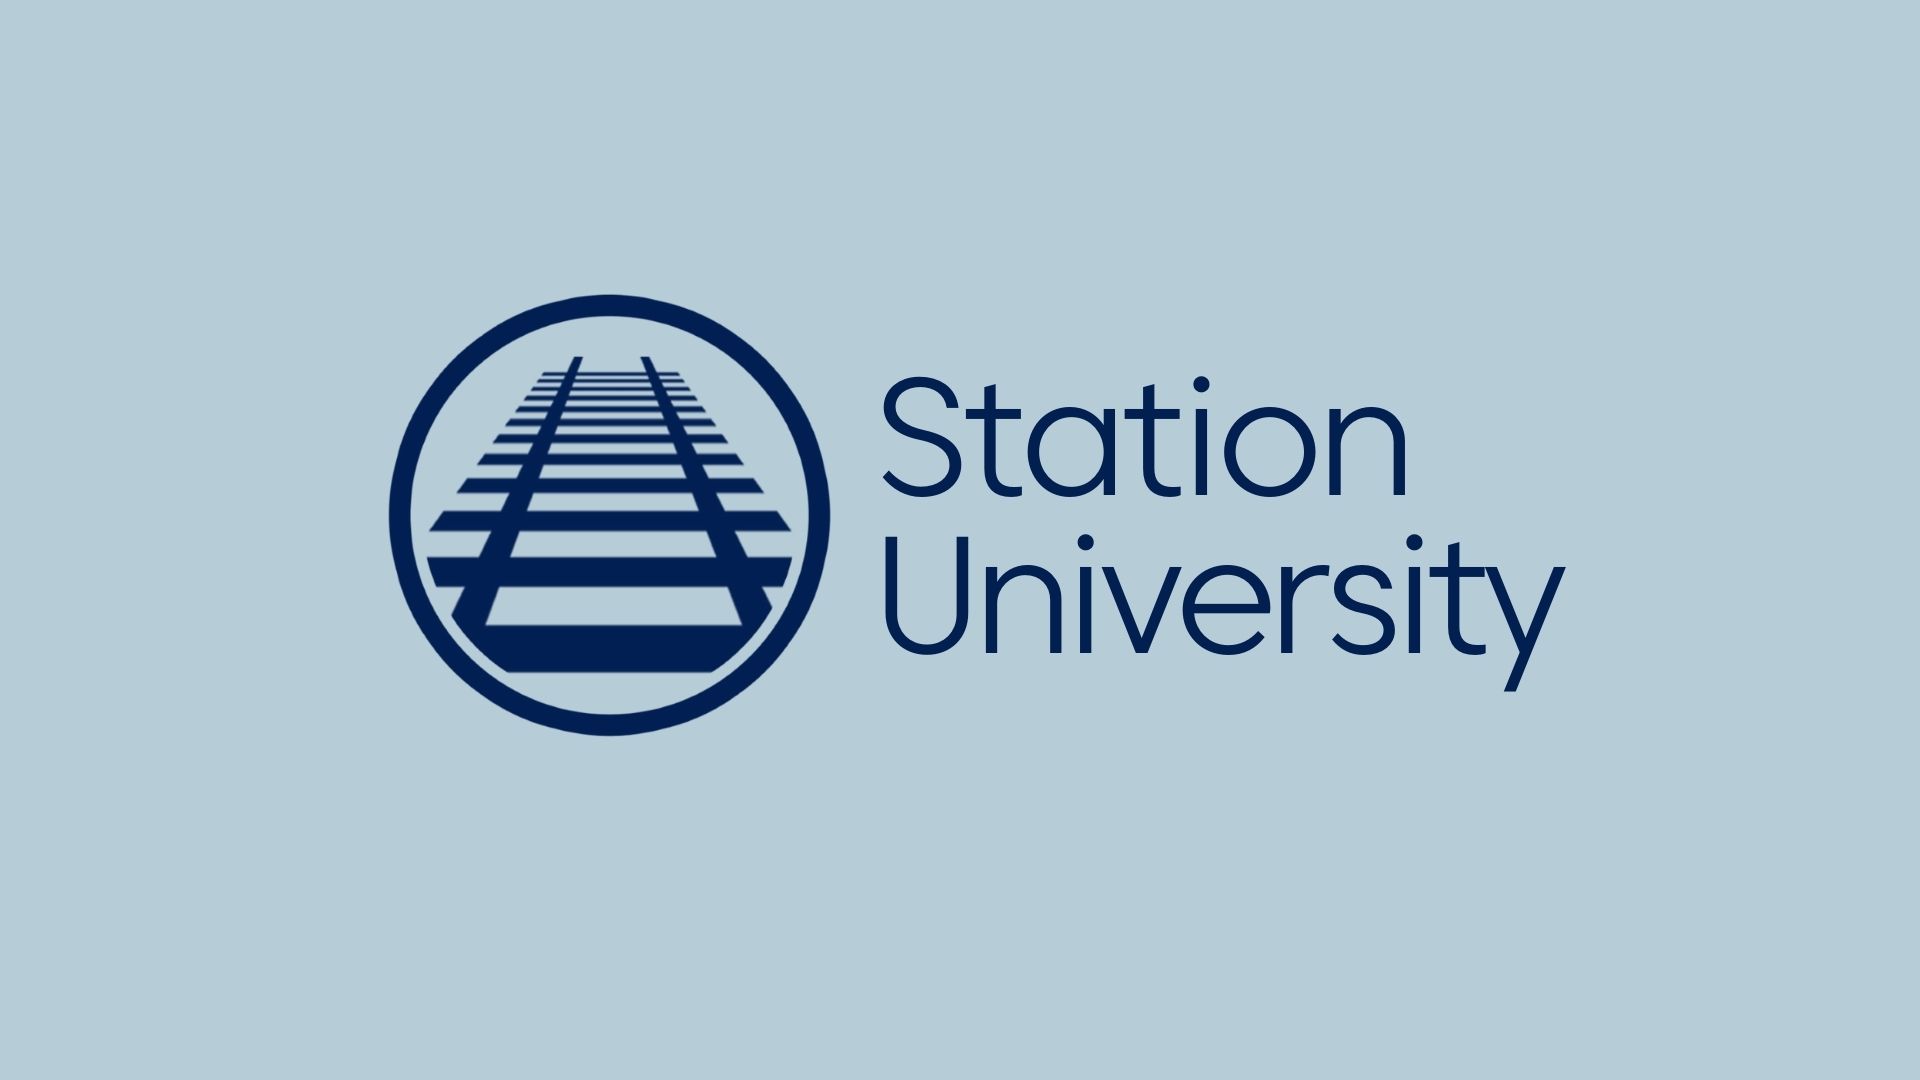 Image of logo of Station University at The Station Church in Hoover, Alabama